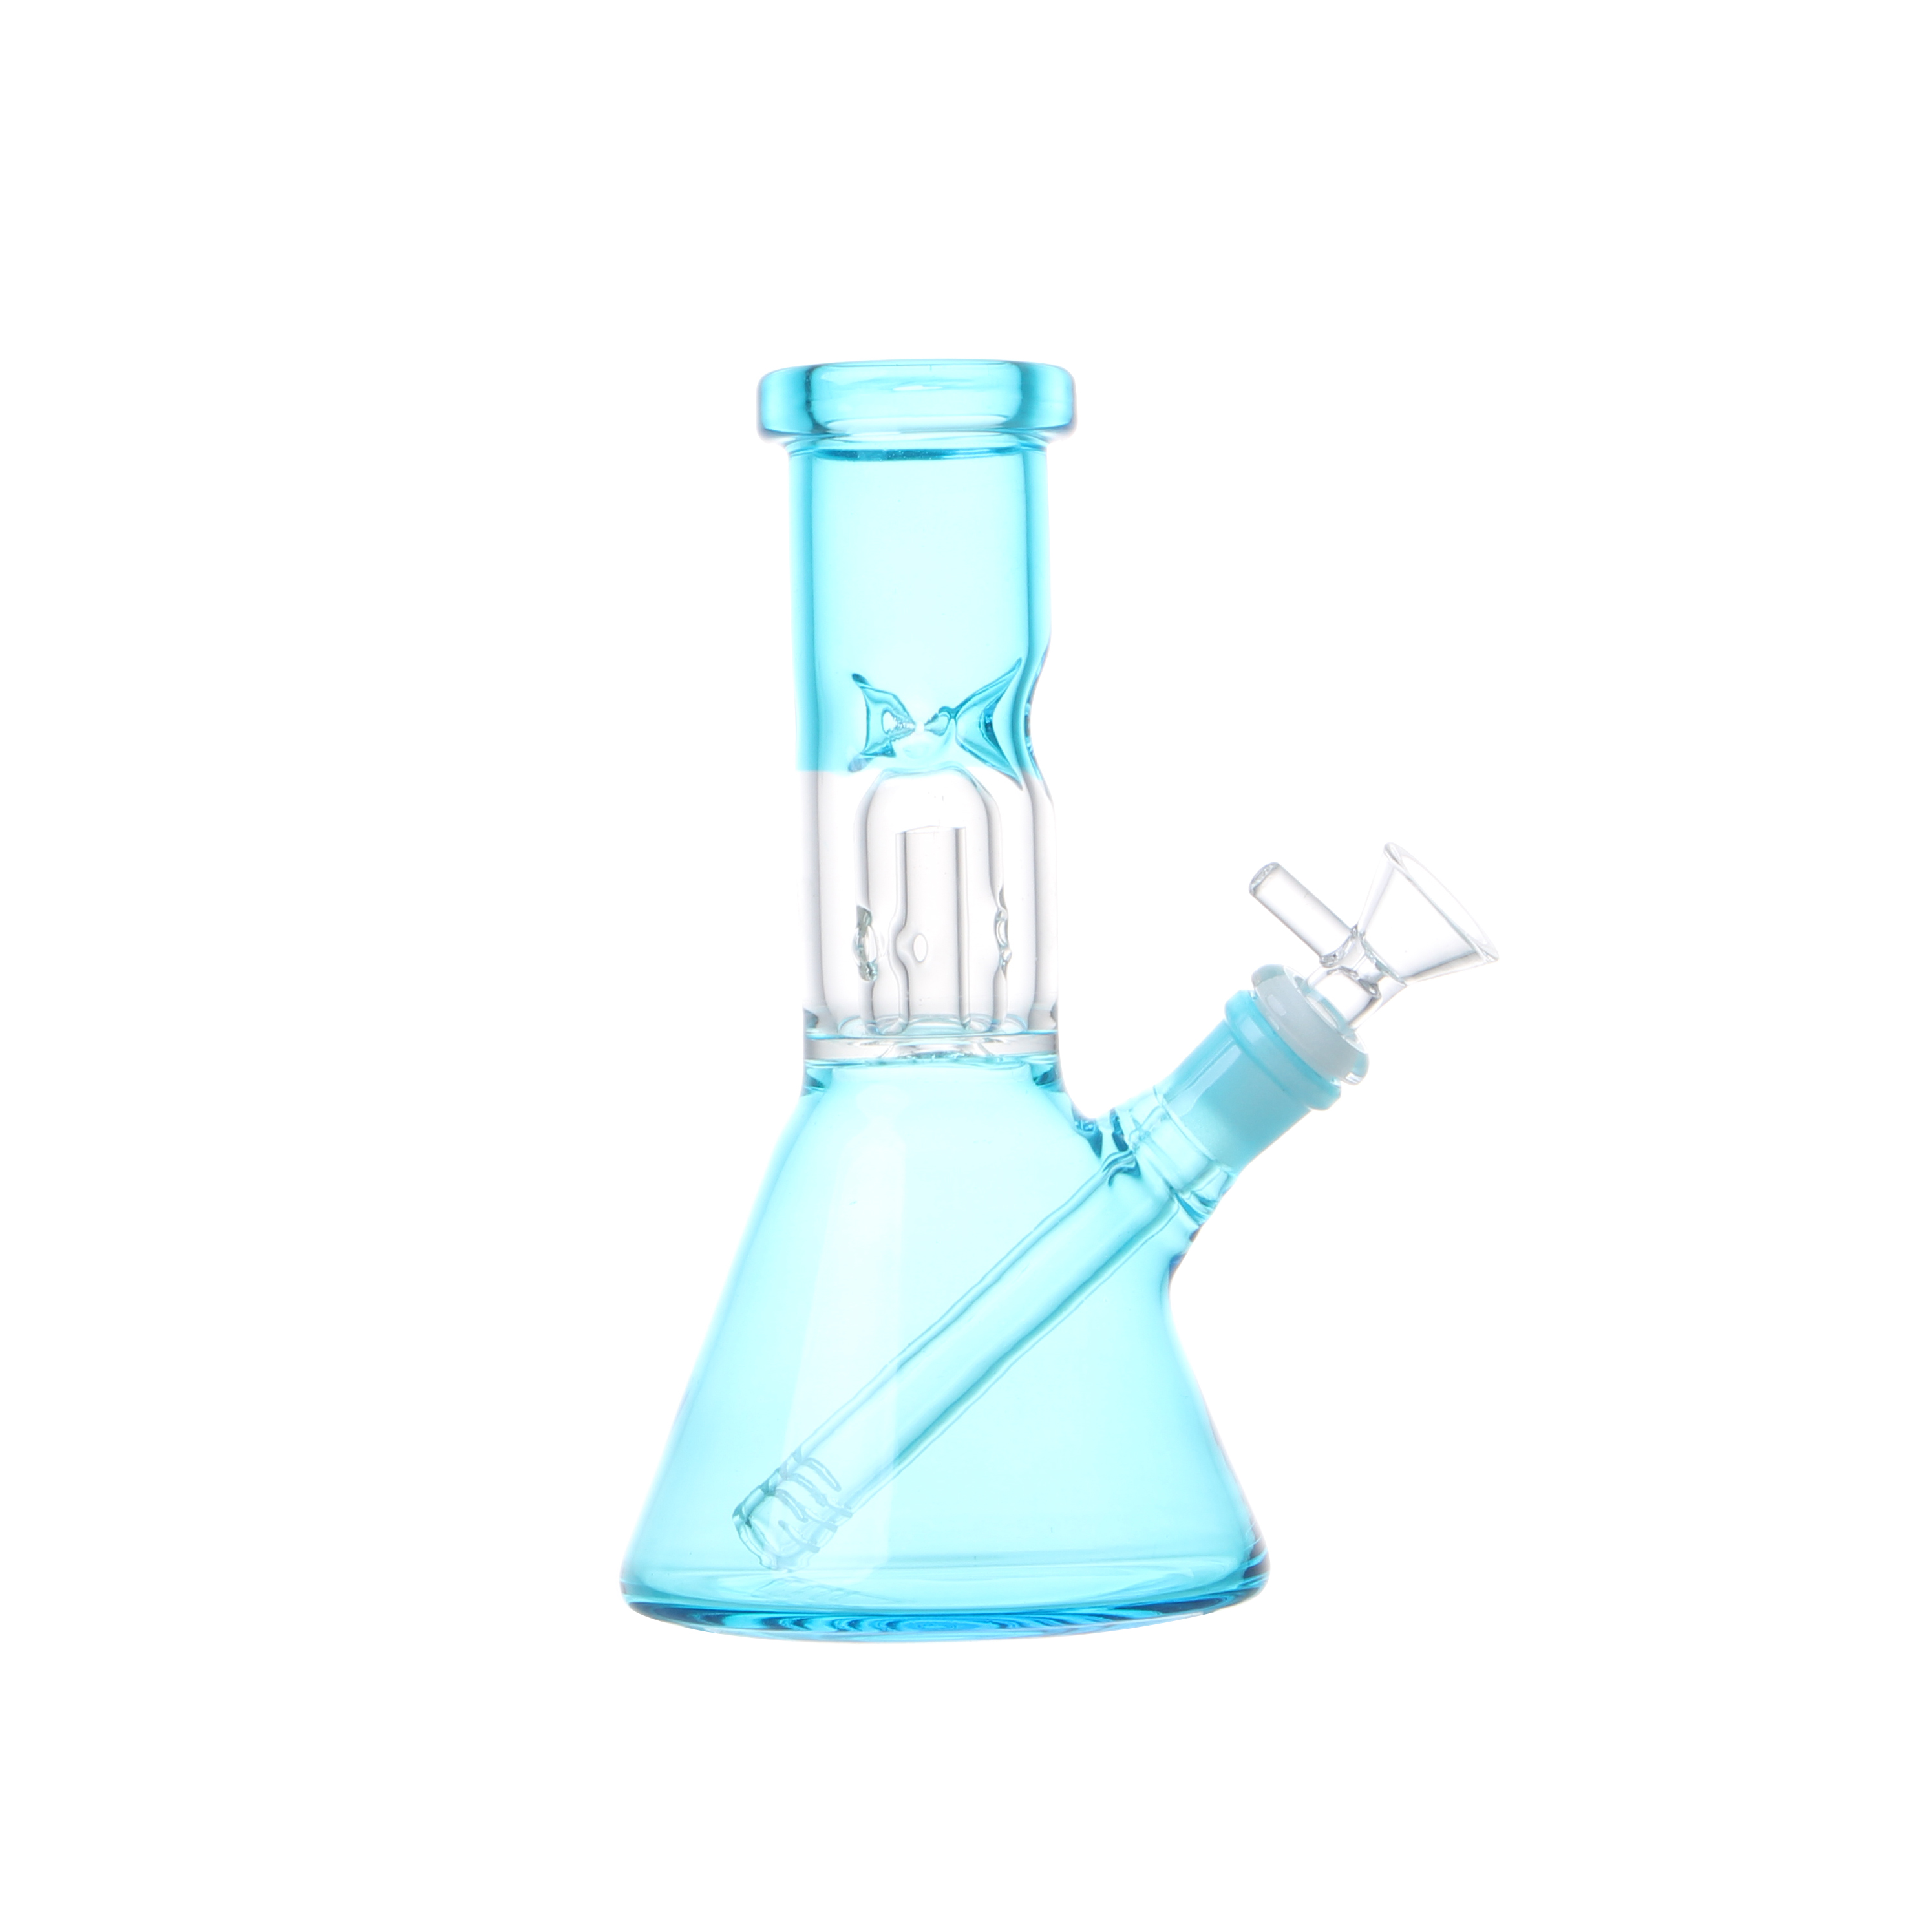 Handmade Bent Glass Water Pipe Bong in Random Colors – High Quality Custom Colored Glass Bong